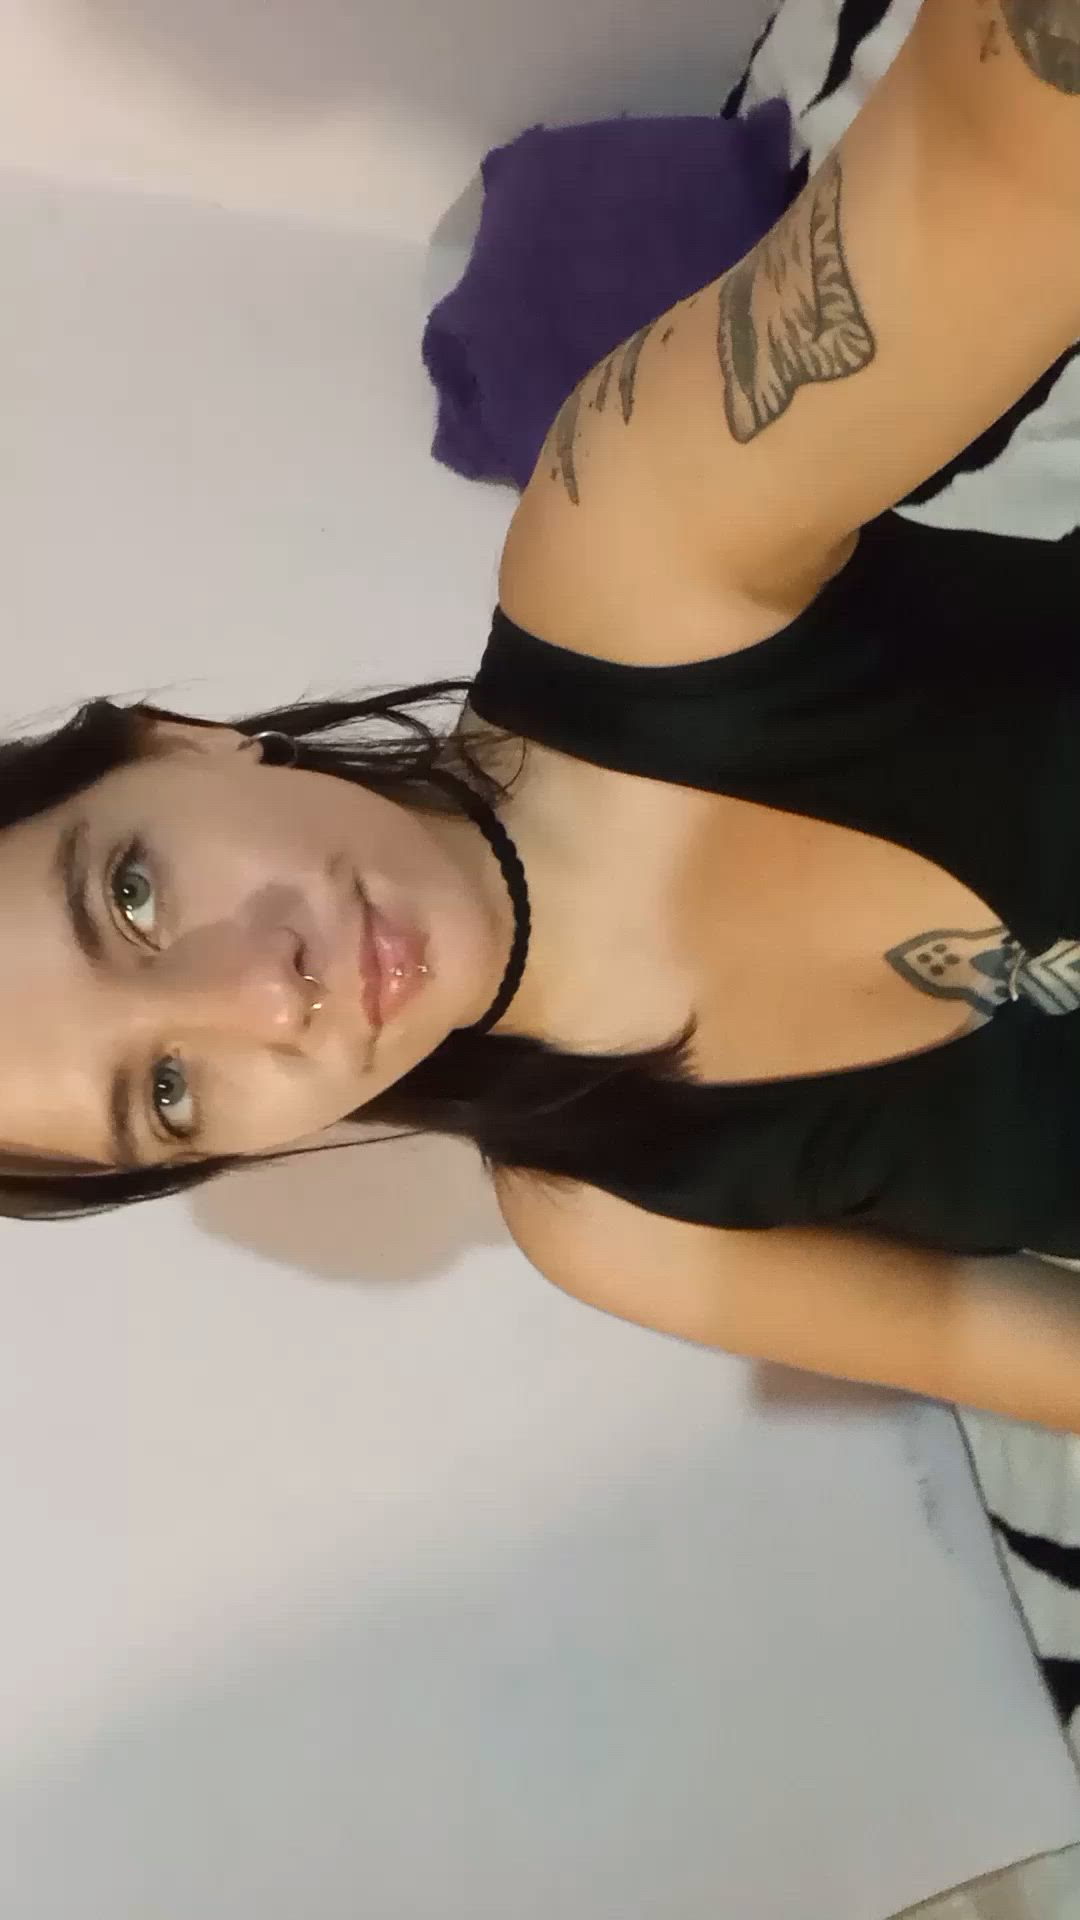 Tits porn video with onlyfans model lunalust1 <strong>@lunalust1</strong>